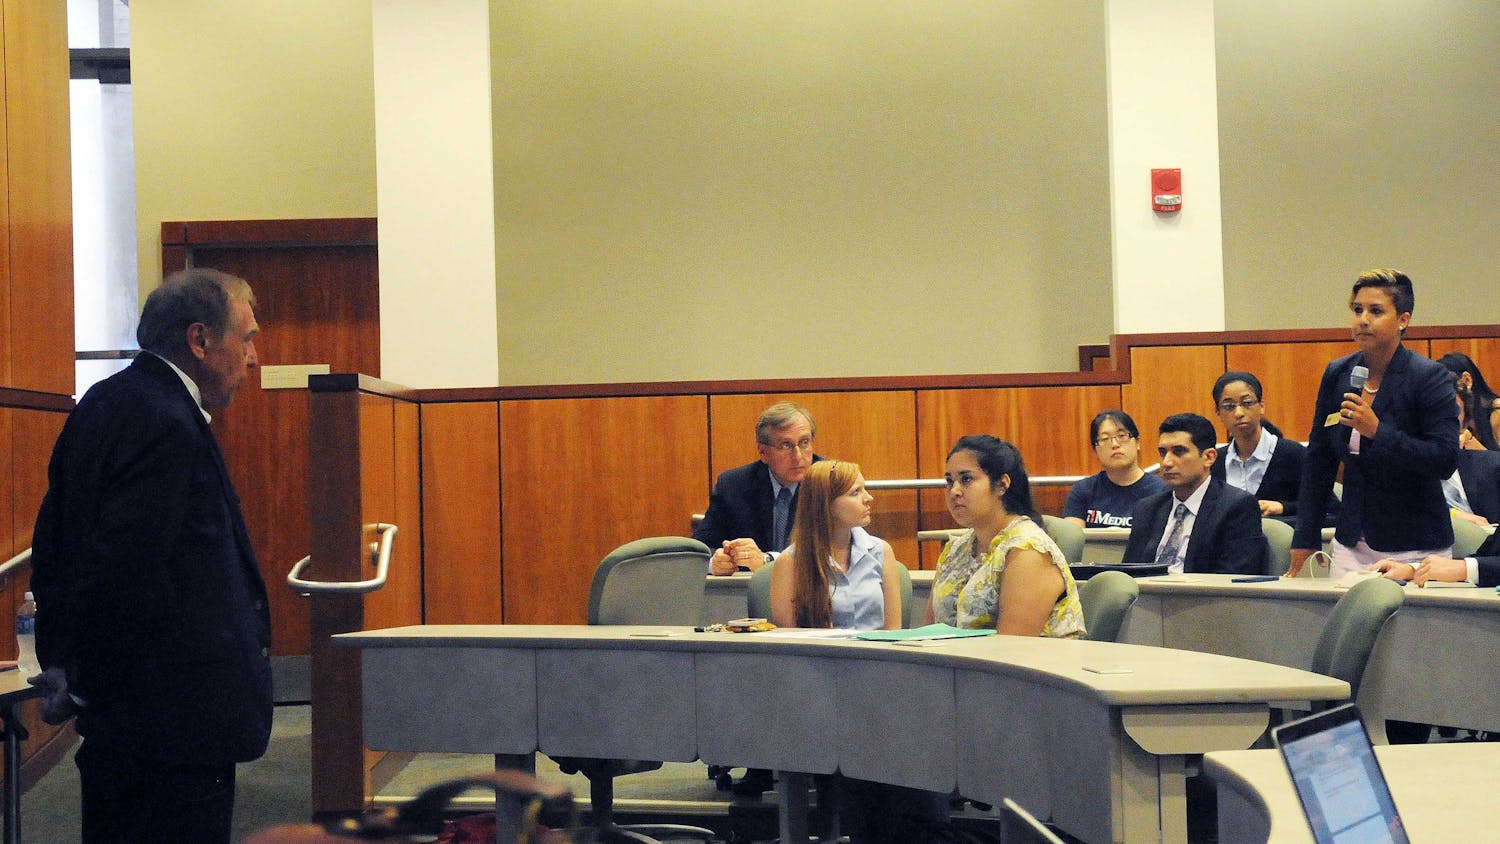 UF student Denae Campanale (right) addresses her concerns about diversity to Winfred Phillips, chairman of President Kent Fuchs' goal-setting task force, at the student town hall meeting on July 7, 2015, at the UF Levin College of Law.